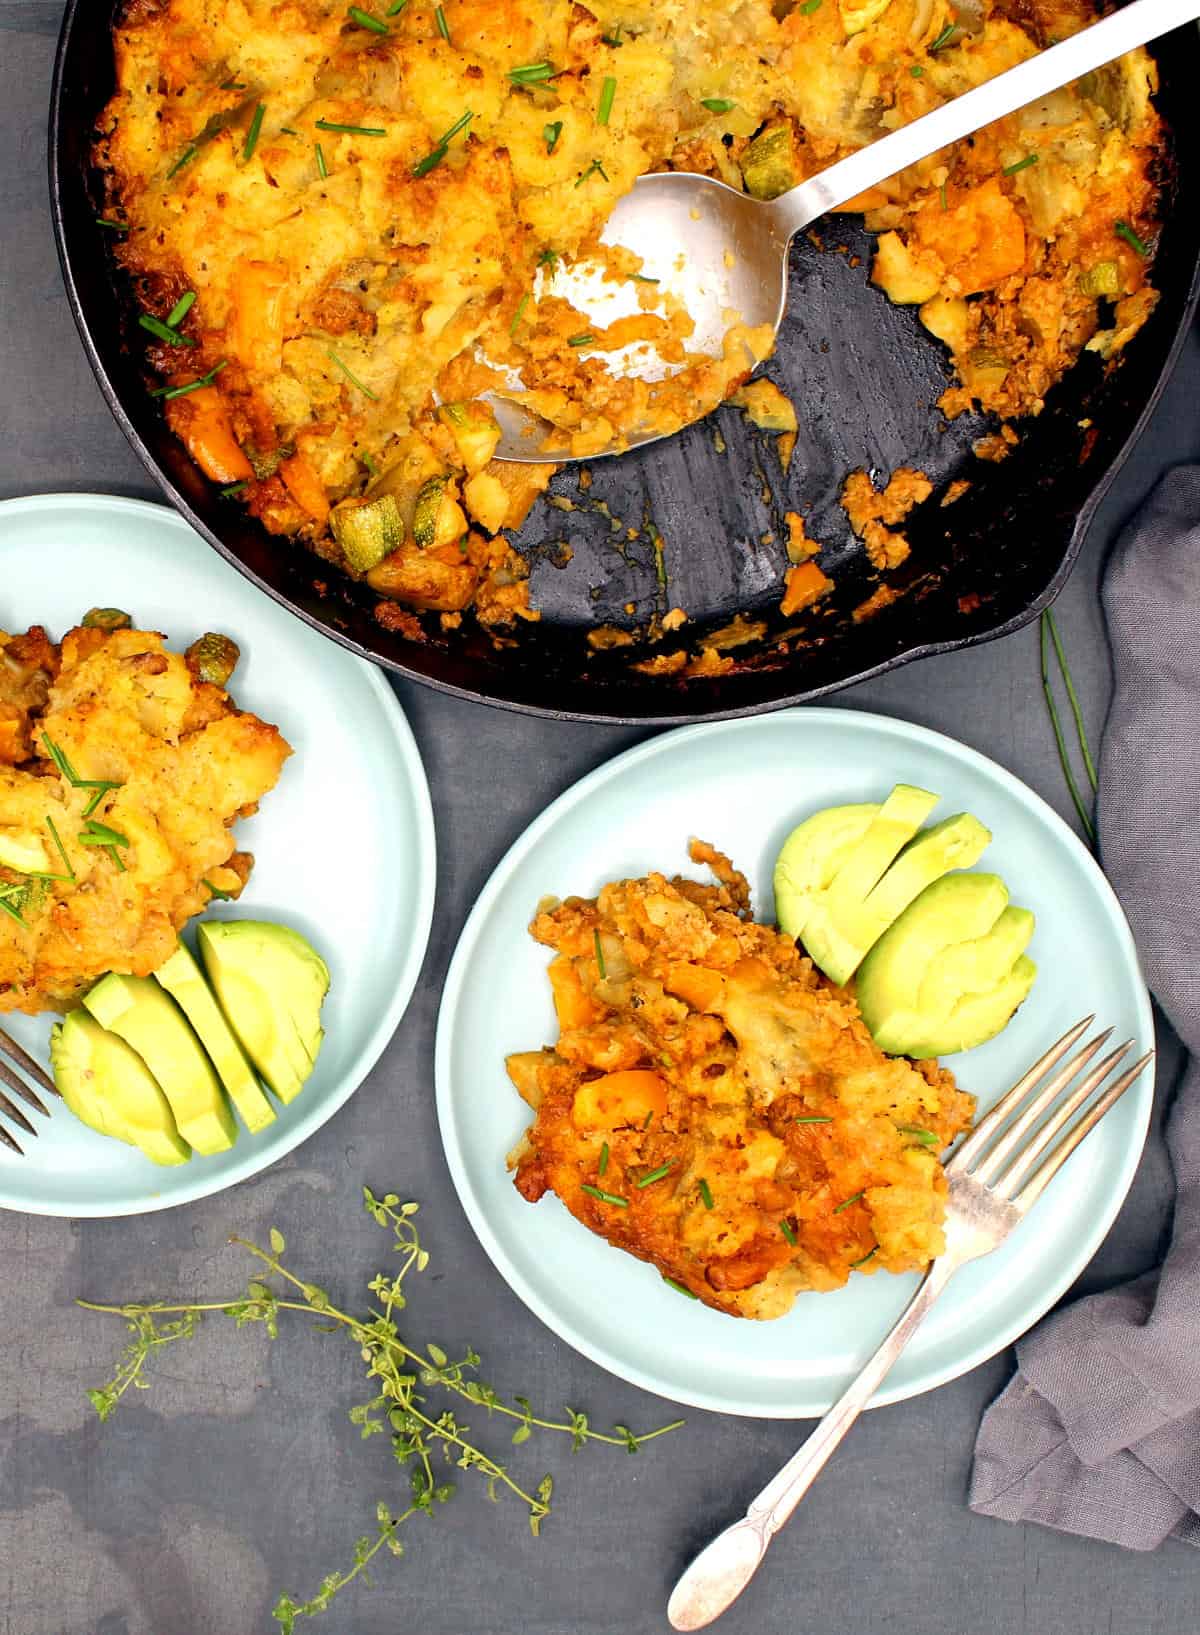 Cheesy vegan dinner bake in skillet and served in two blue-green plates with avocado.